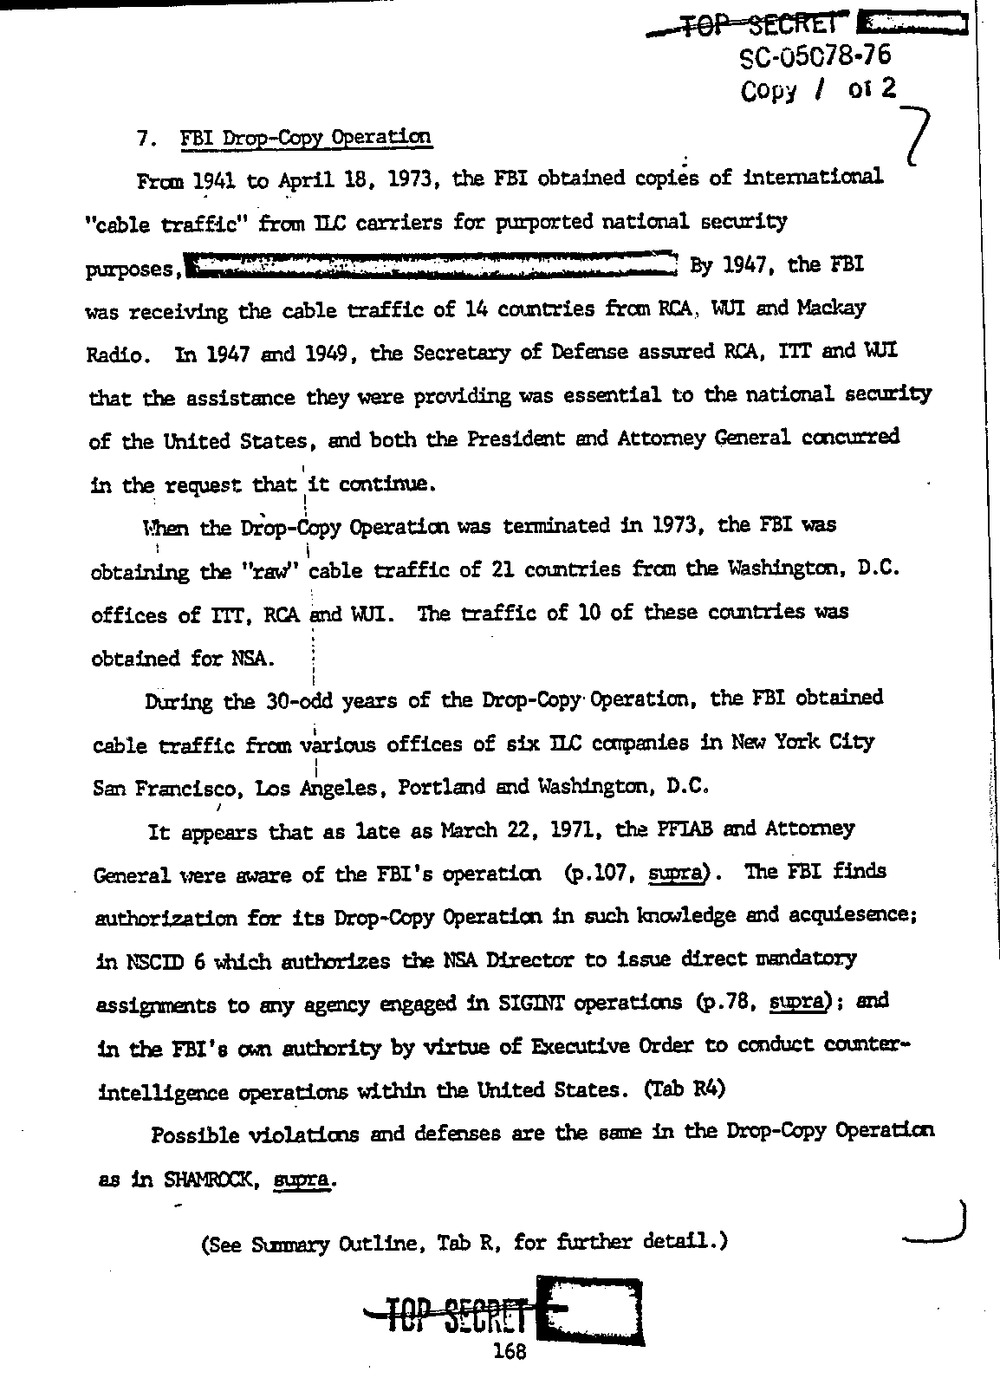 Page 176 from Report on Inquiry Into CIA Related Electronic Surveillance Activities